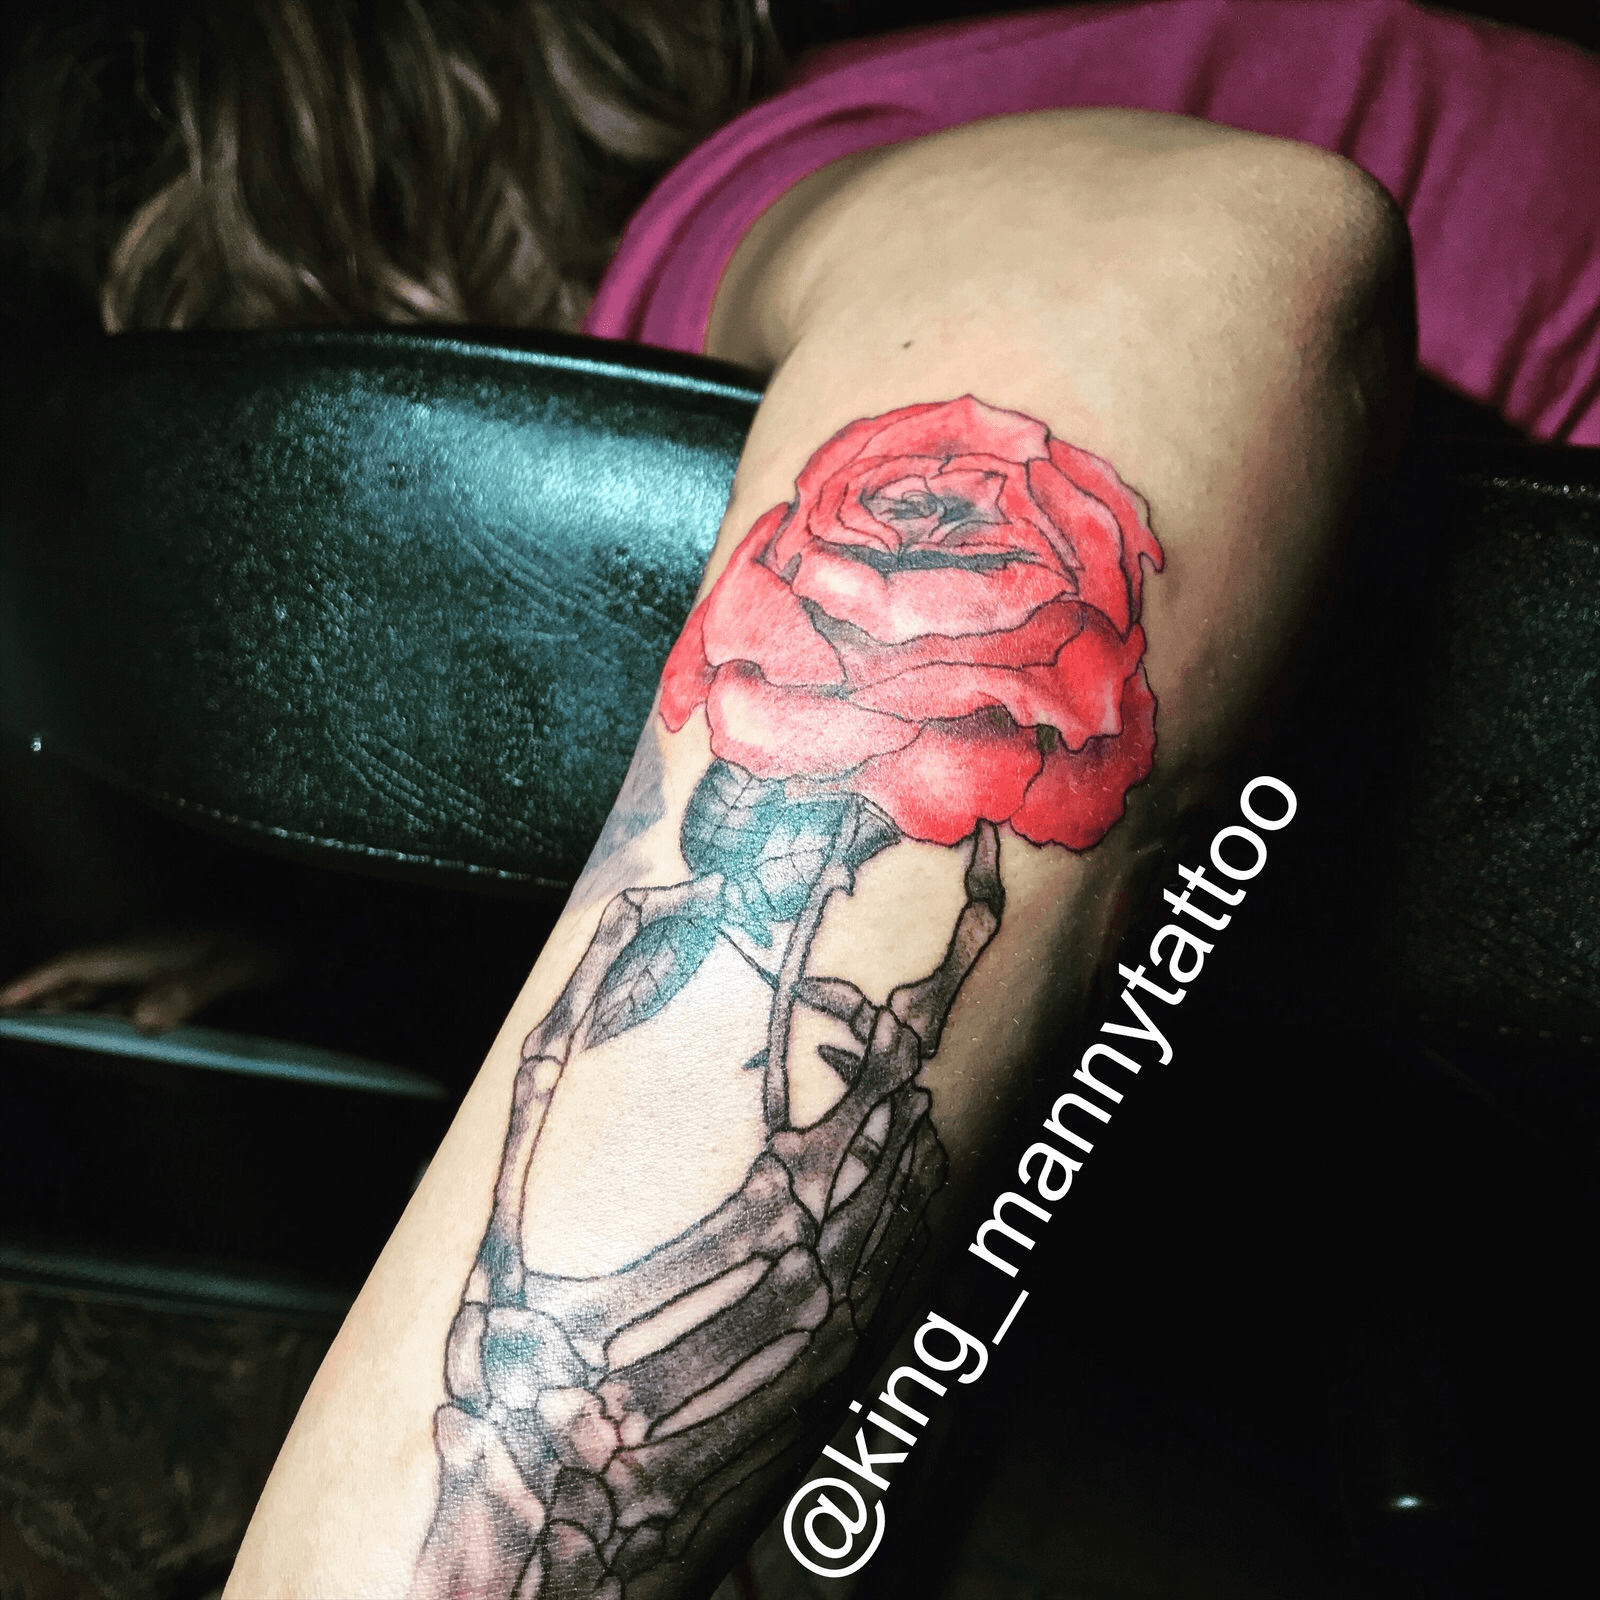 Hand holding rose tattoo by Luc 